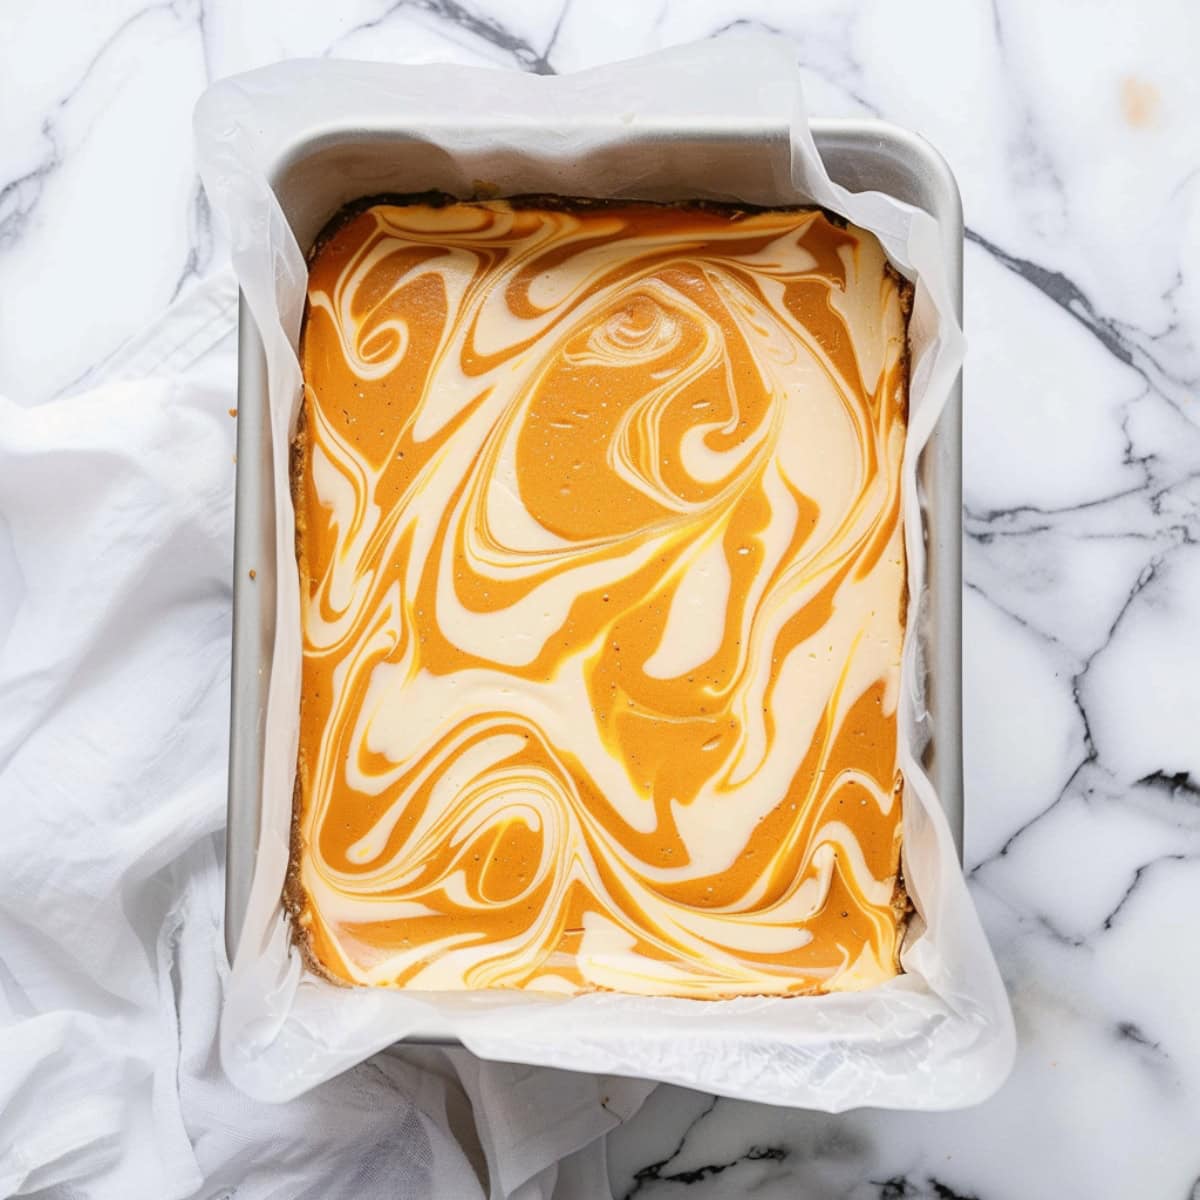 Pumpkin cheesecake swirled in a baking pan with parchment paper.